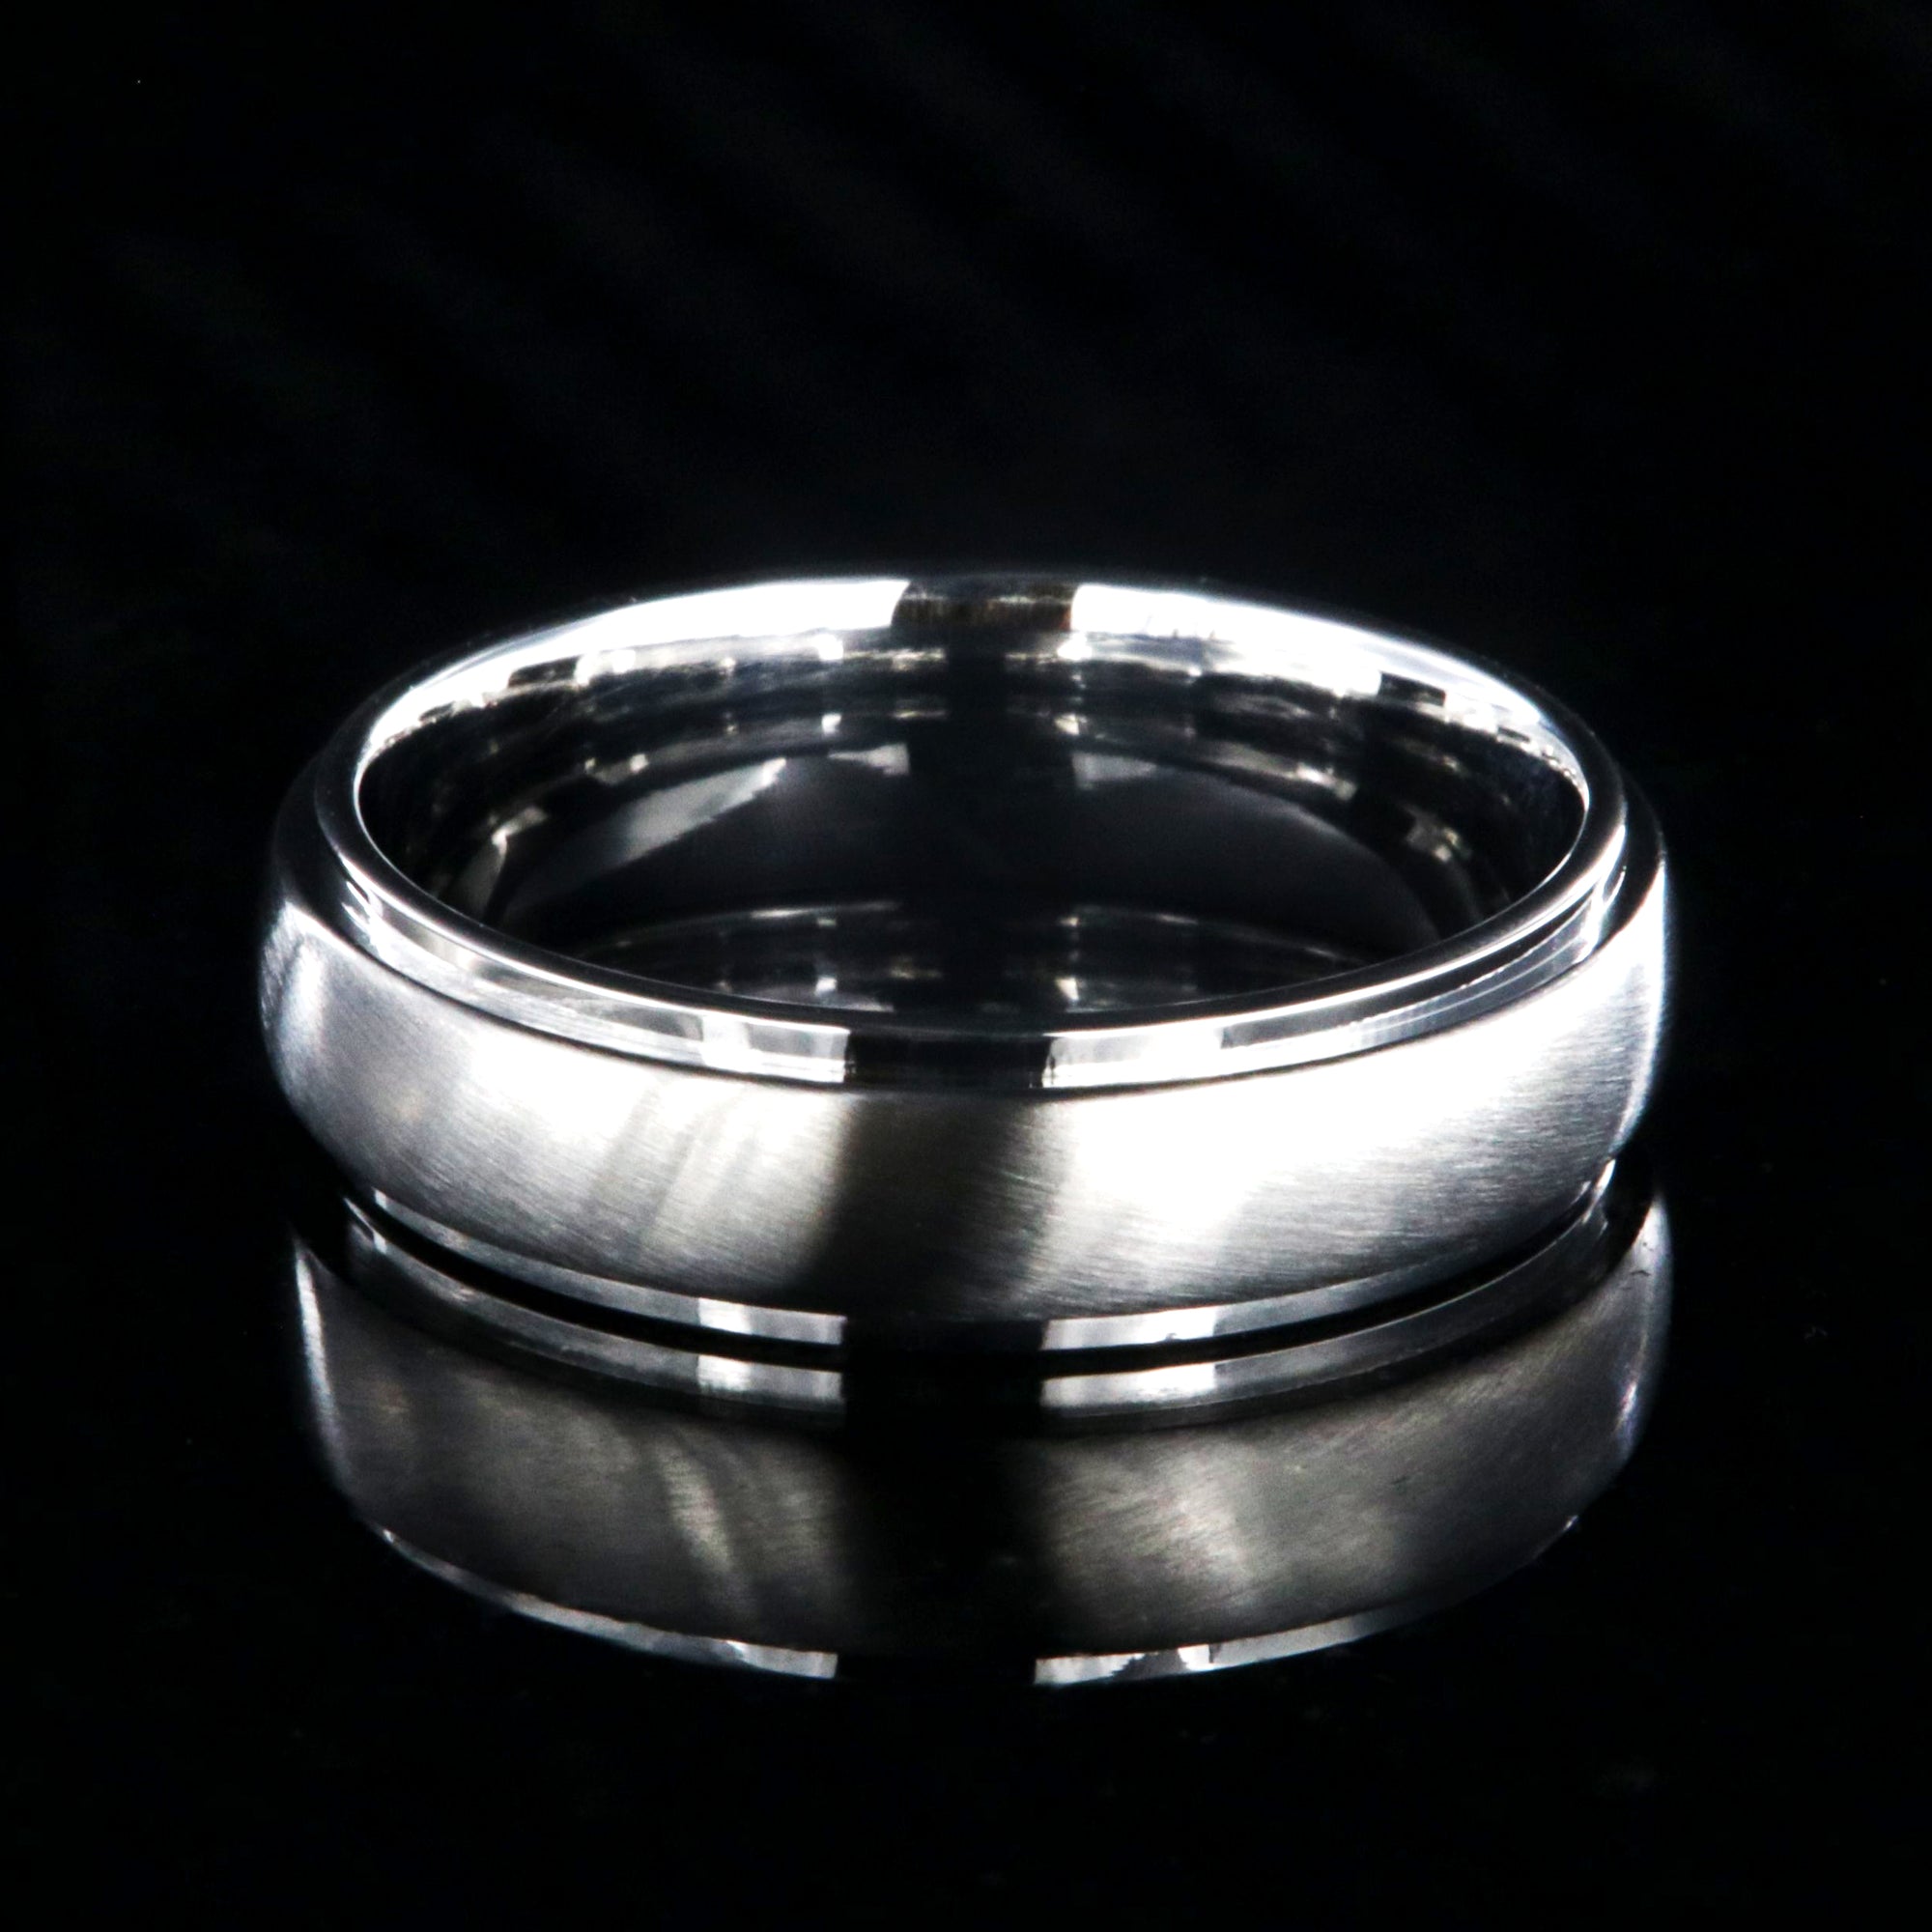 6mm wide cobalt ring with a brushed raise-center and polished edges